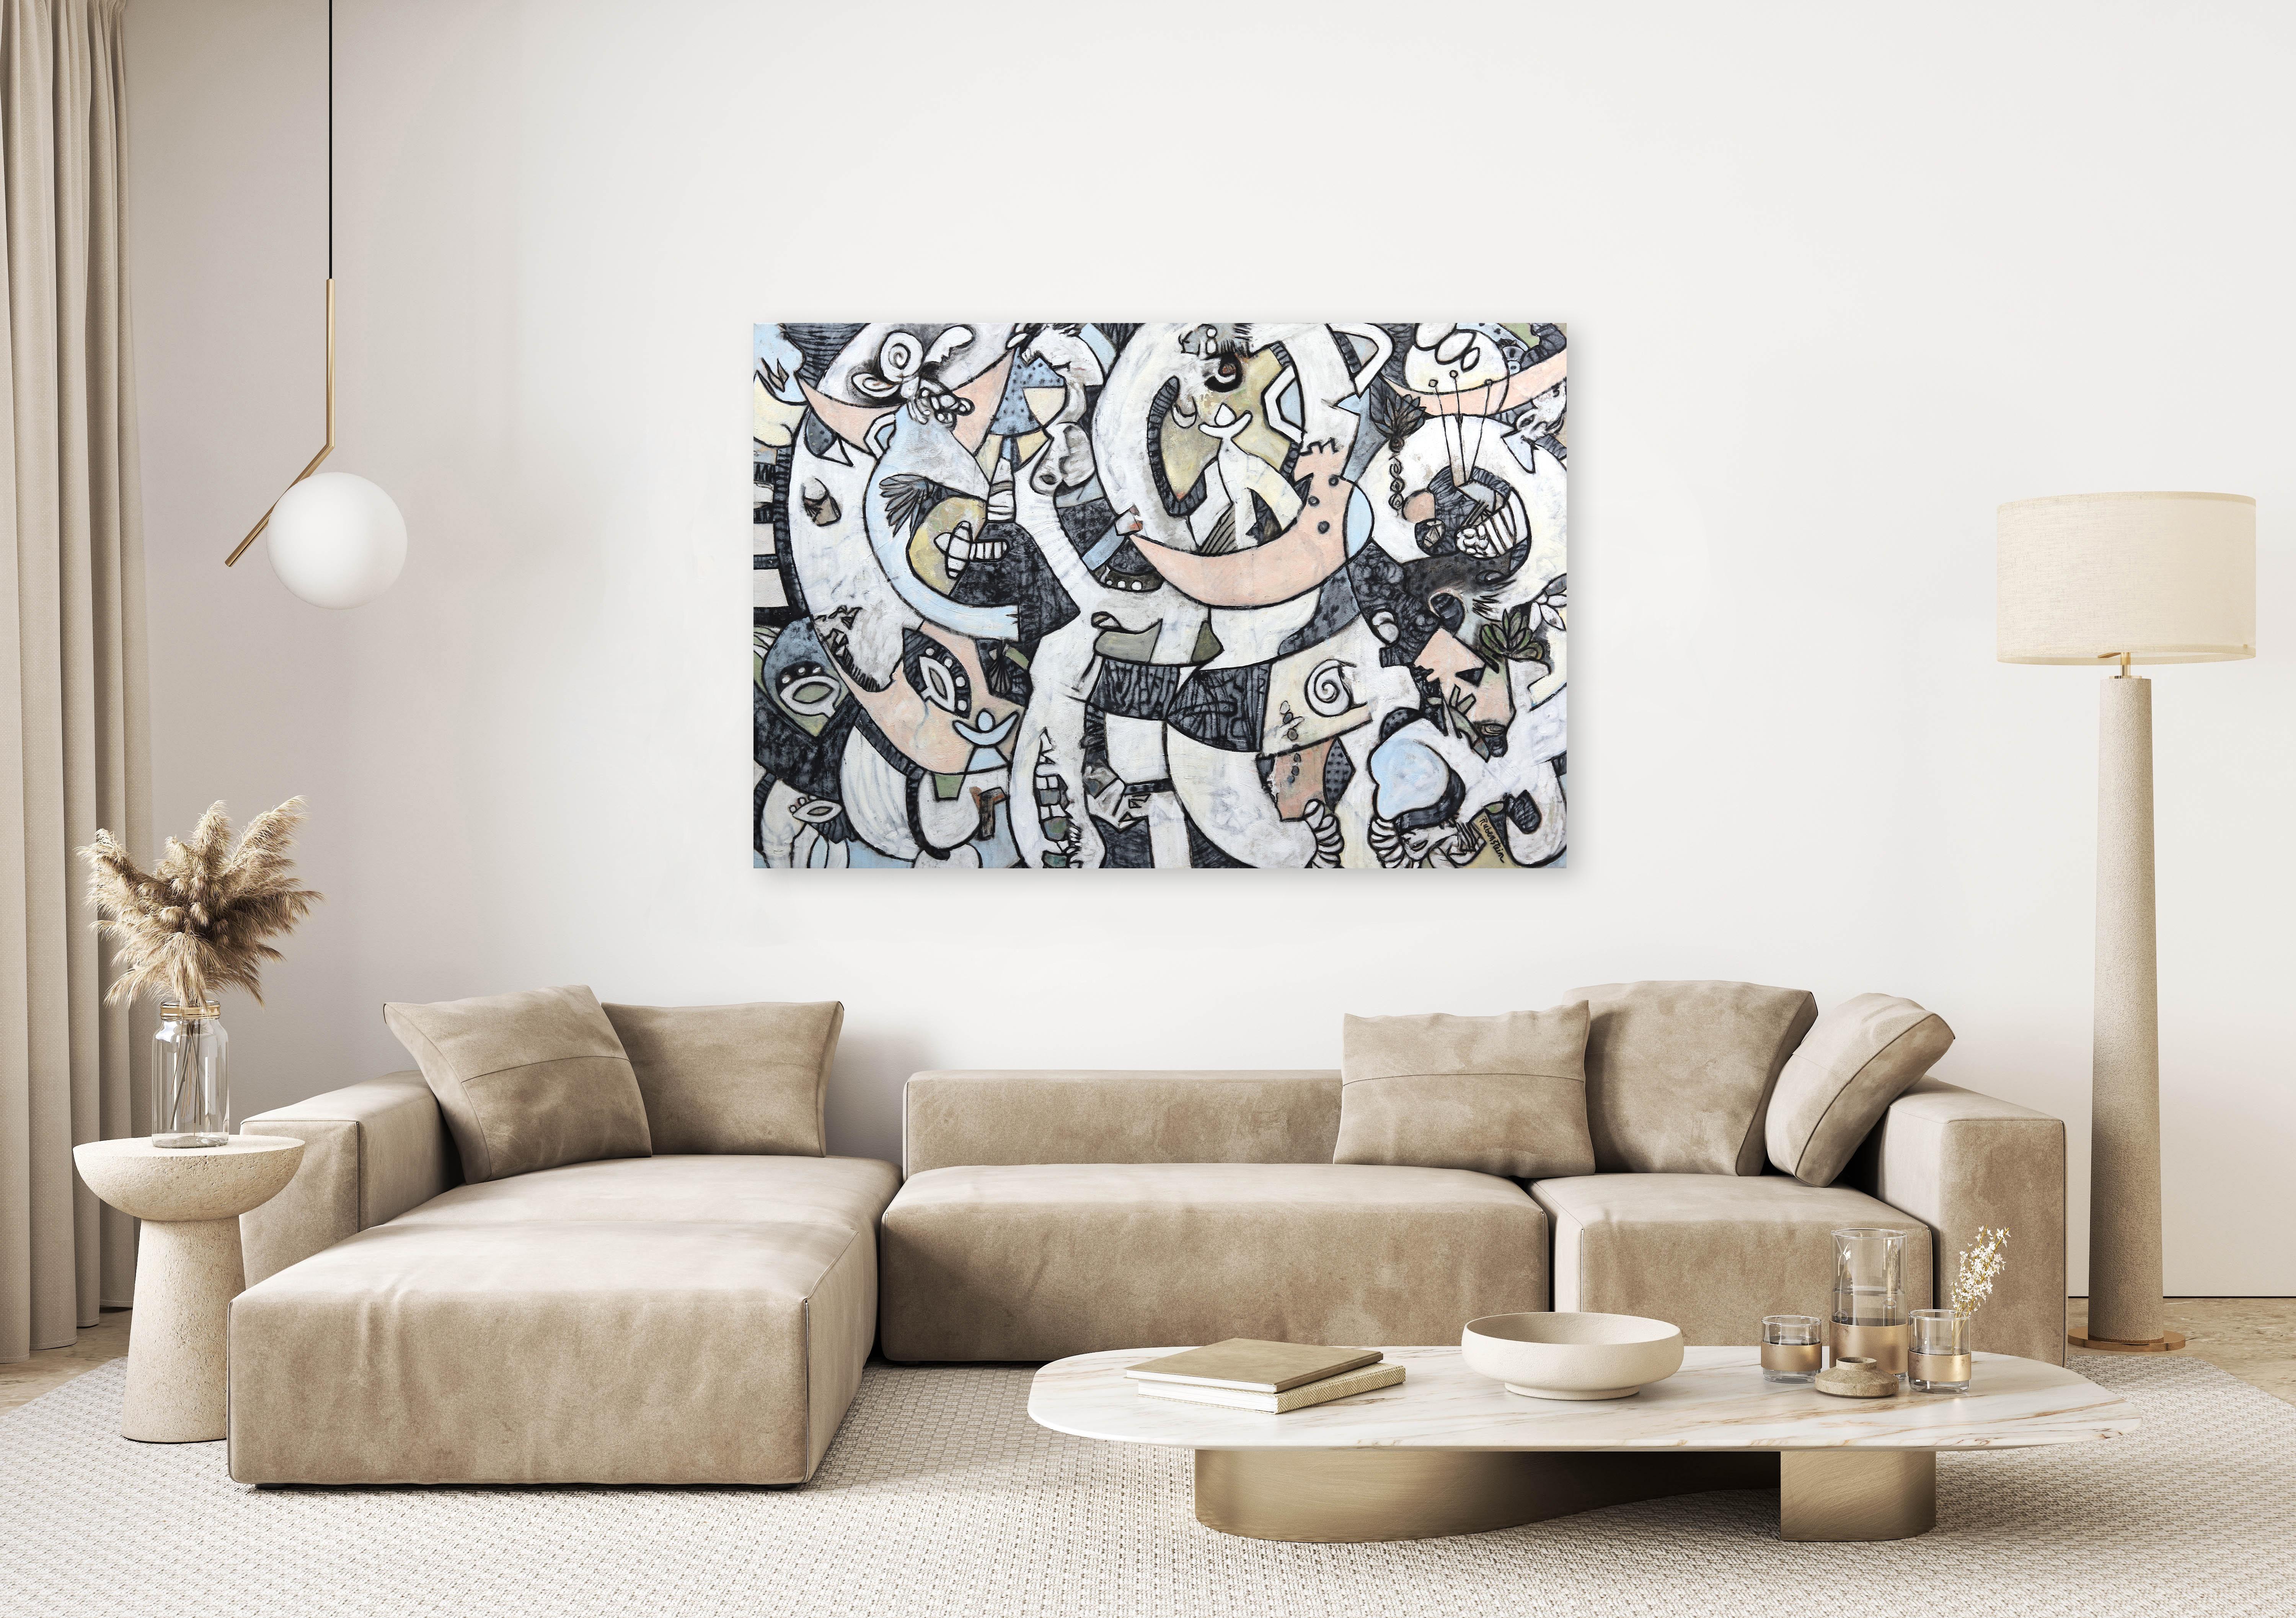 The paintings of Bruce Rubenstein seamlessly marry sophistication with affordability. His original art merges the creative attitudes of the two distinct art hot spots of New York and Los Angeles. Rubenstein's work has a rigid edge and strong